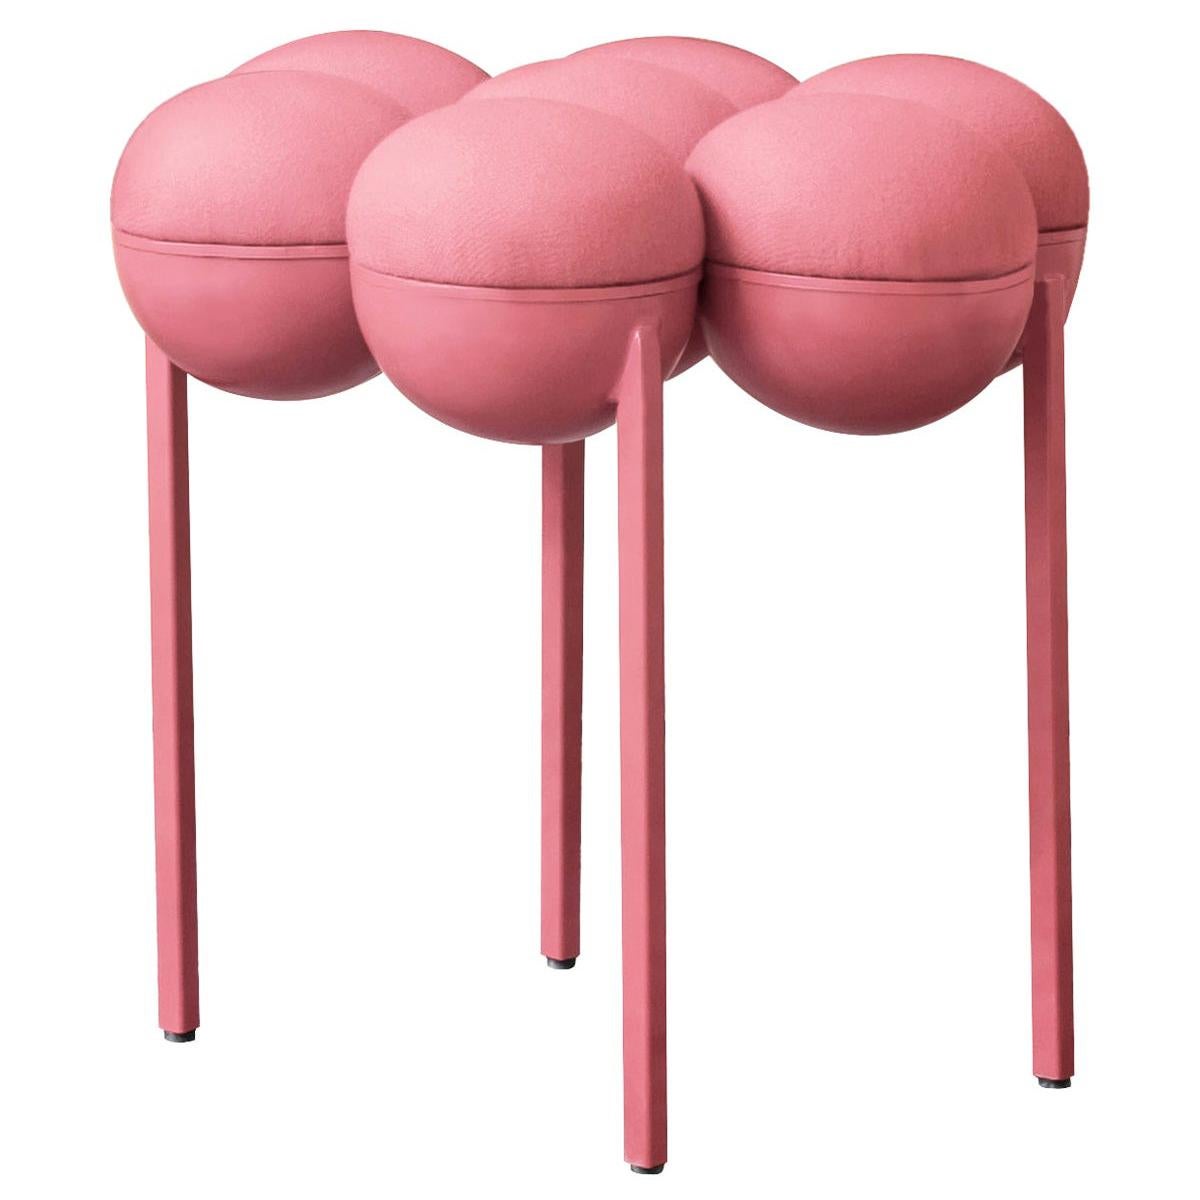 Saturn Pouffe Small, Pink Coated Steel Frame and Pink Wool by Lara Bohinc